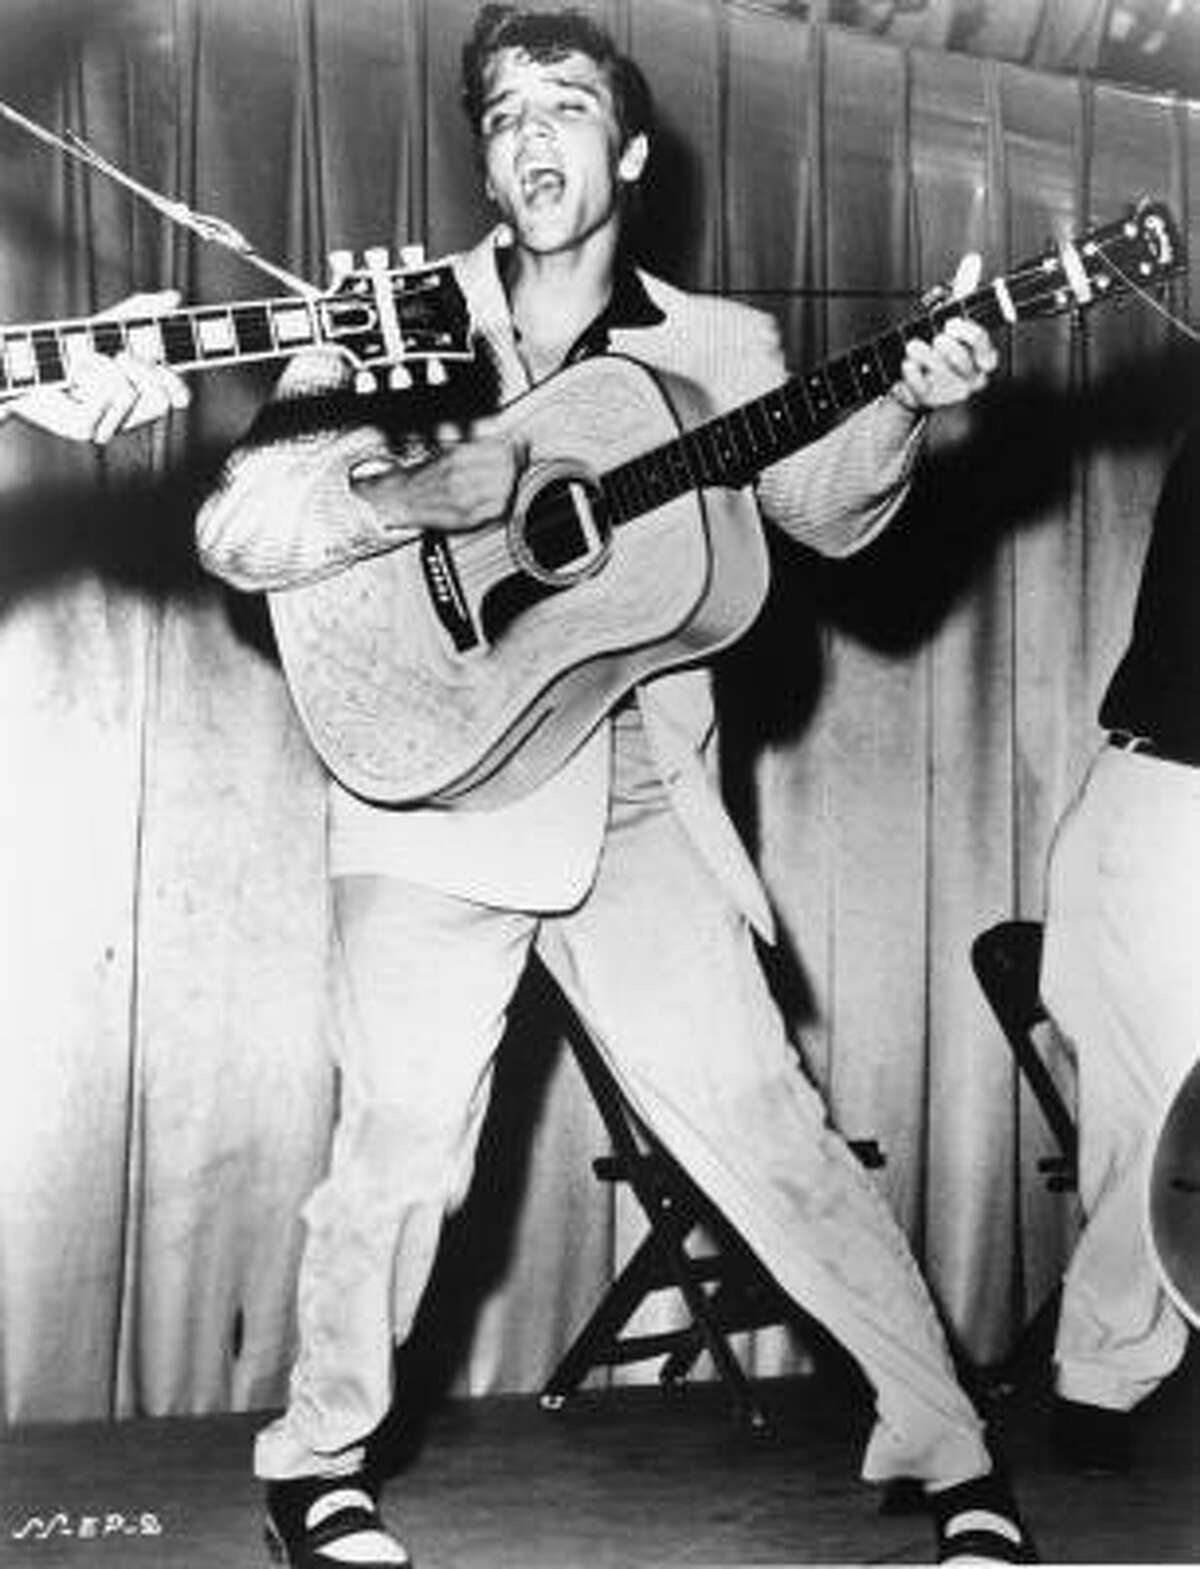 This is a 1956 file photo, originally supplied by RCA Victor, shows Elvis Presley performing. This photo was used for his first RCA Victor album cover.